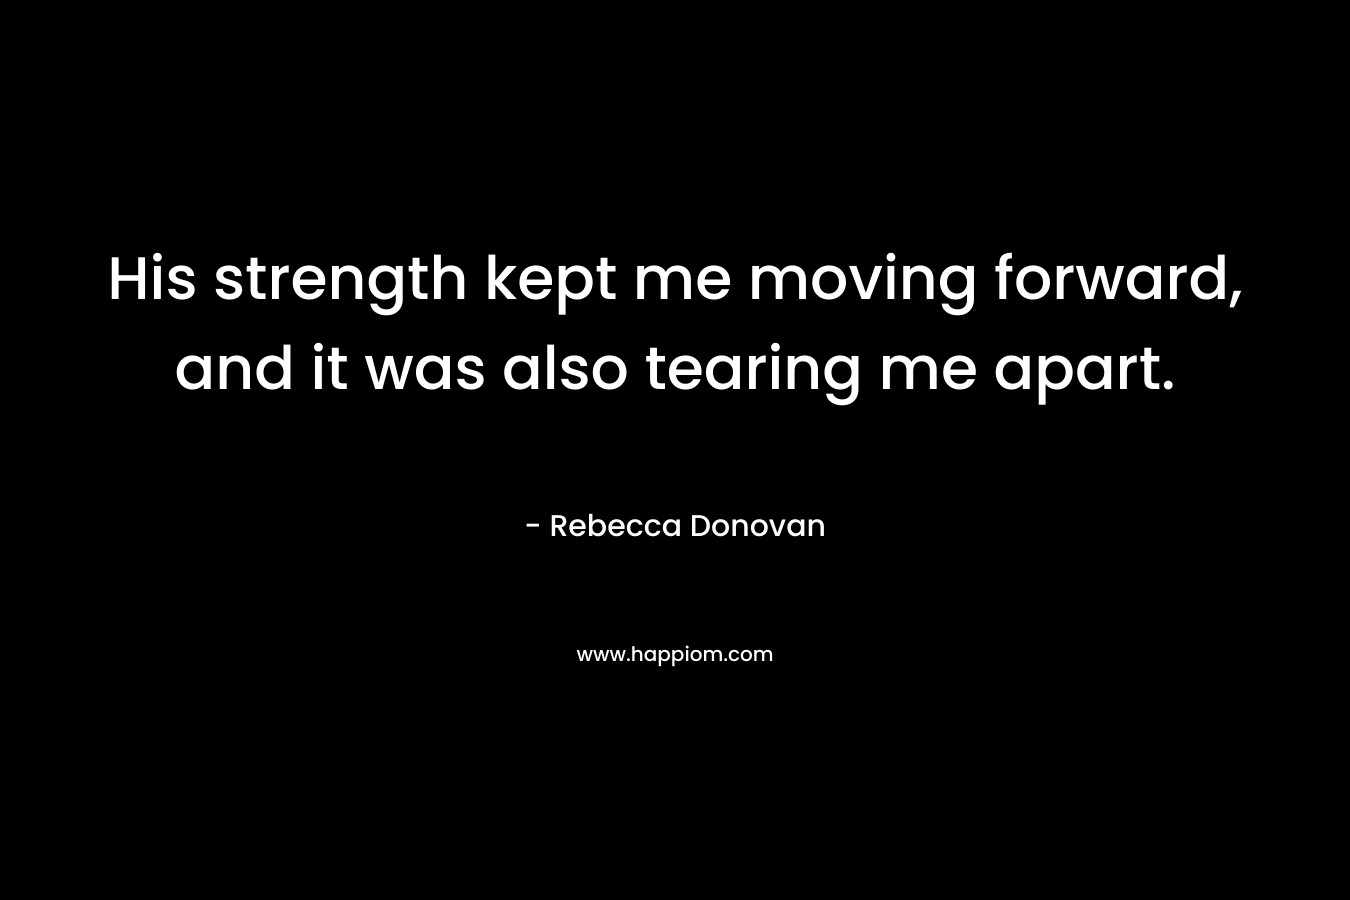 His strength kept me moving forward, and it was also tearing me apart. – Rebecca Donovan